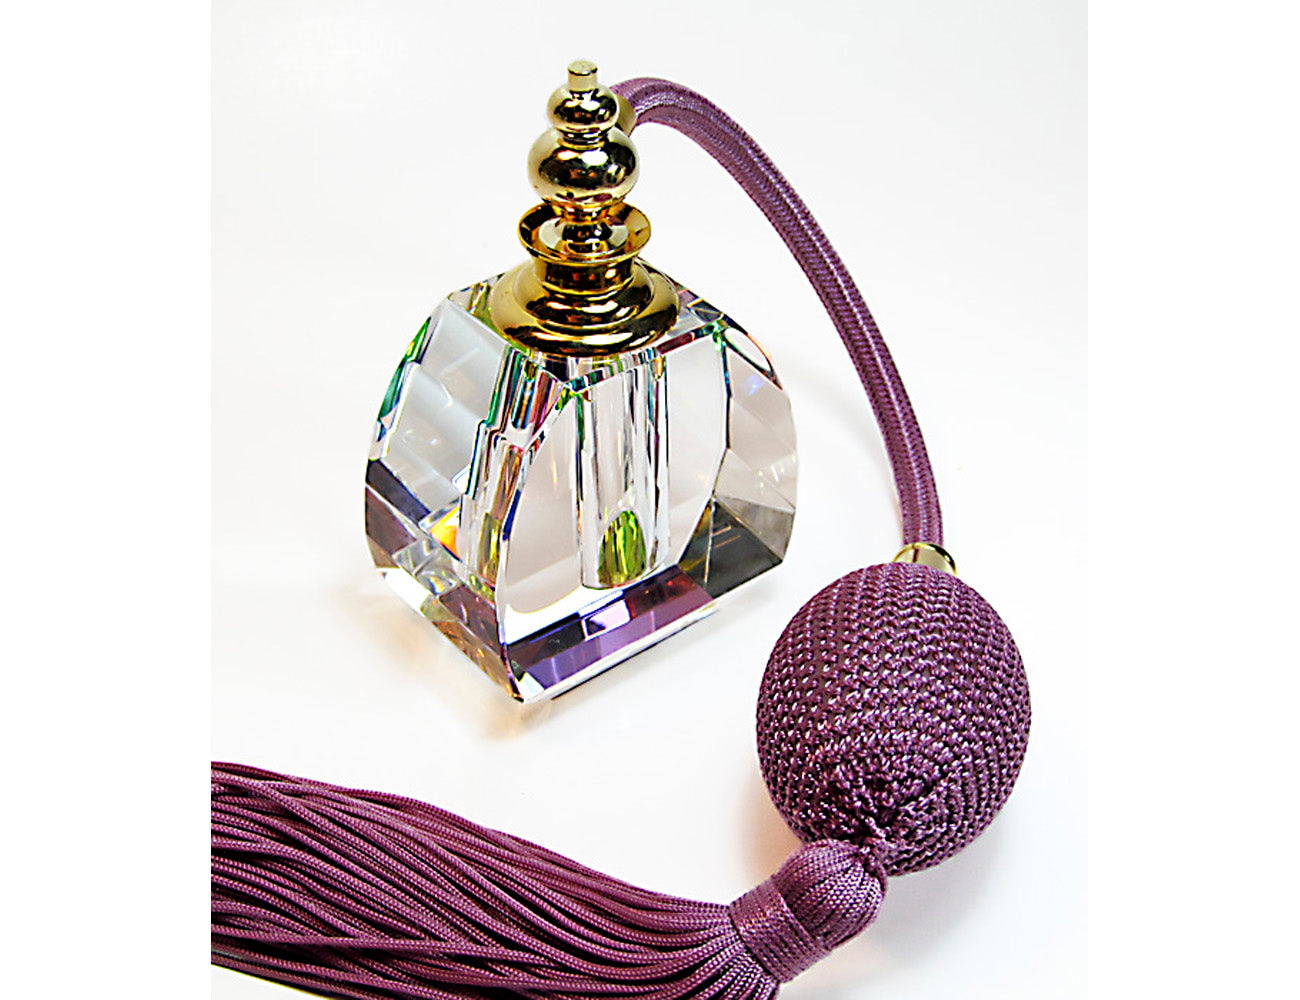 Hand Made Lead Crystal Perfume Bottle With Bulb And Tassel Spray Mounting.